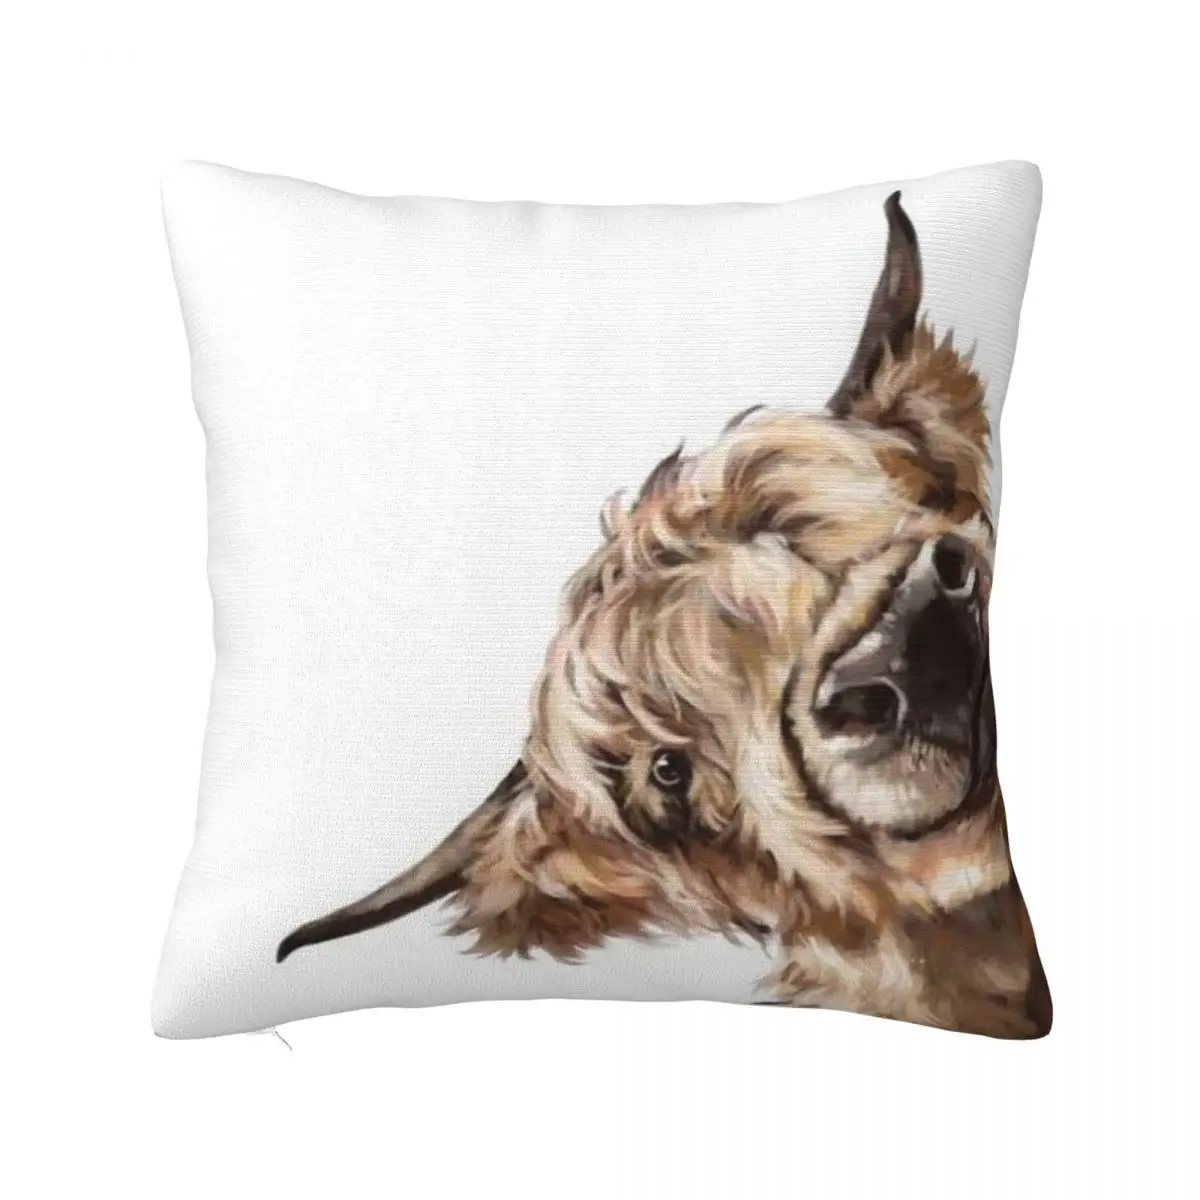 Highland Cow Animal Plaid Pillowcase Soft Polyester Cushion Cover Decorations Throw Pillow Case Cover Home Drop Shipping 40*40cm